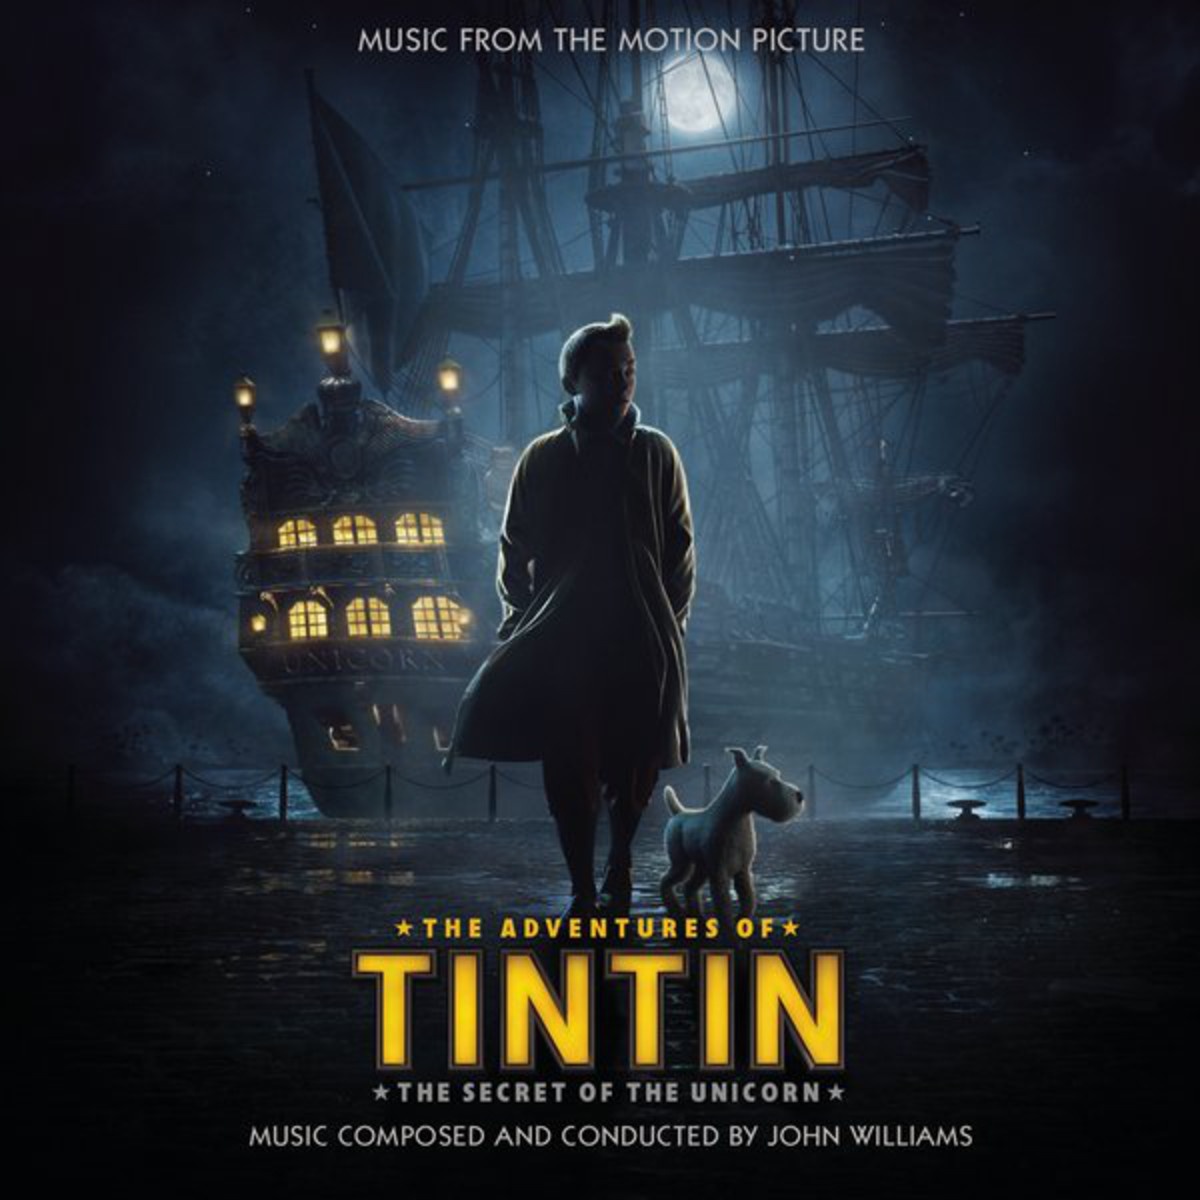 The Adventures of Tintin (Music from the Motion Picture)